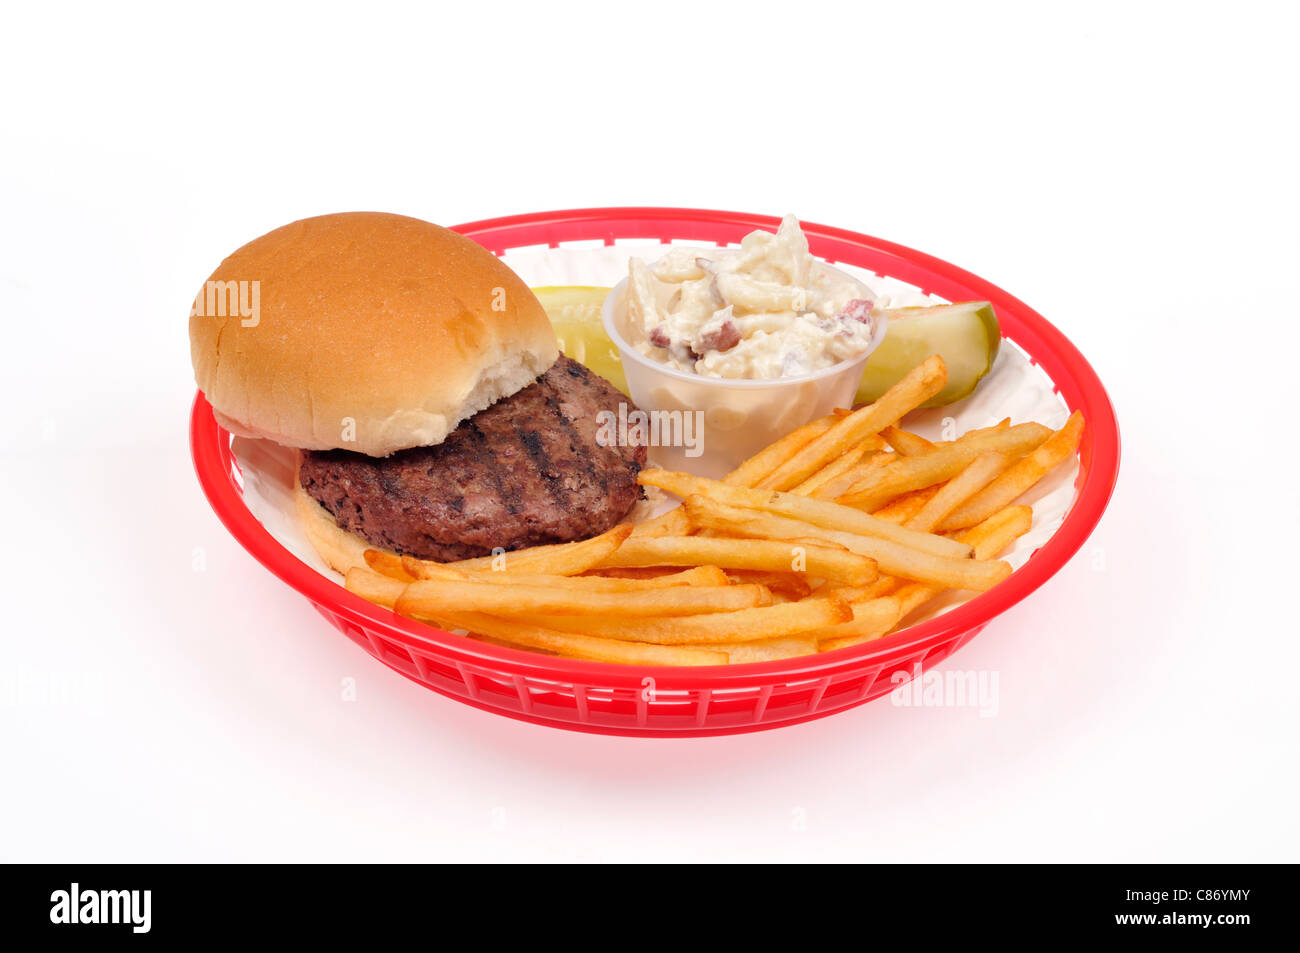 Hot grilled beef hamburger with french fries, potato salad and pickle in red plastic takeaway basket on white background, cutout. USA Stock Photo